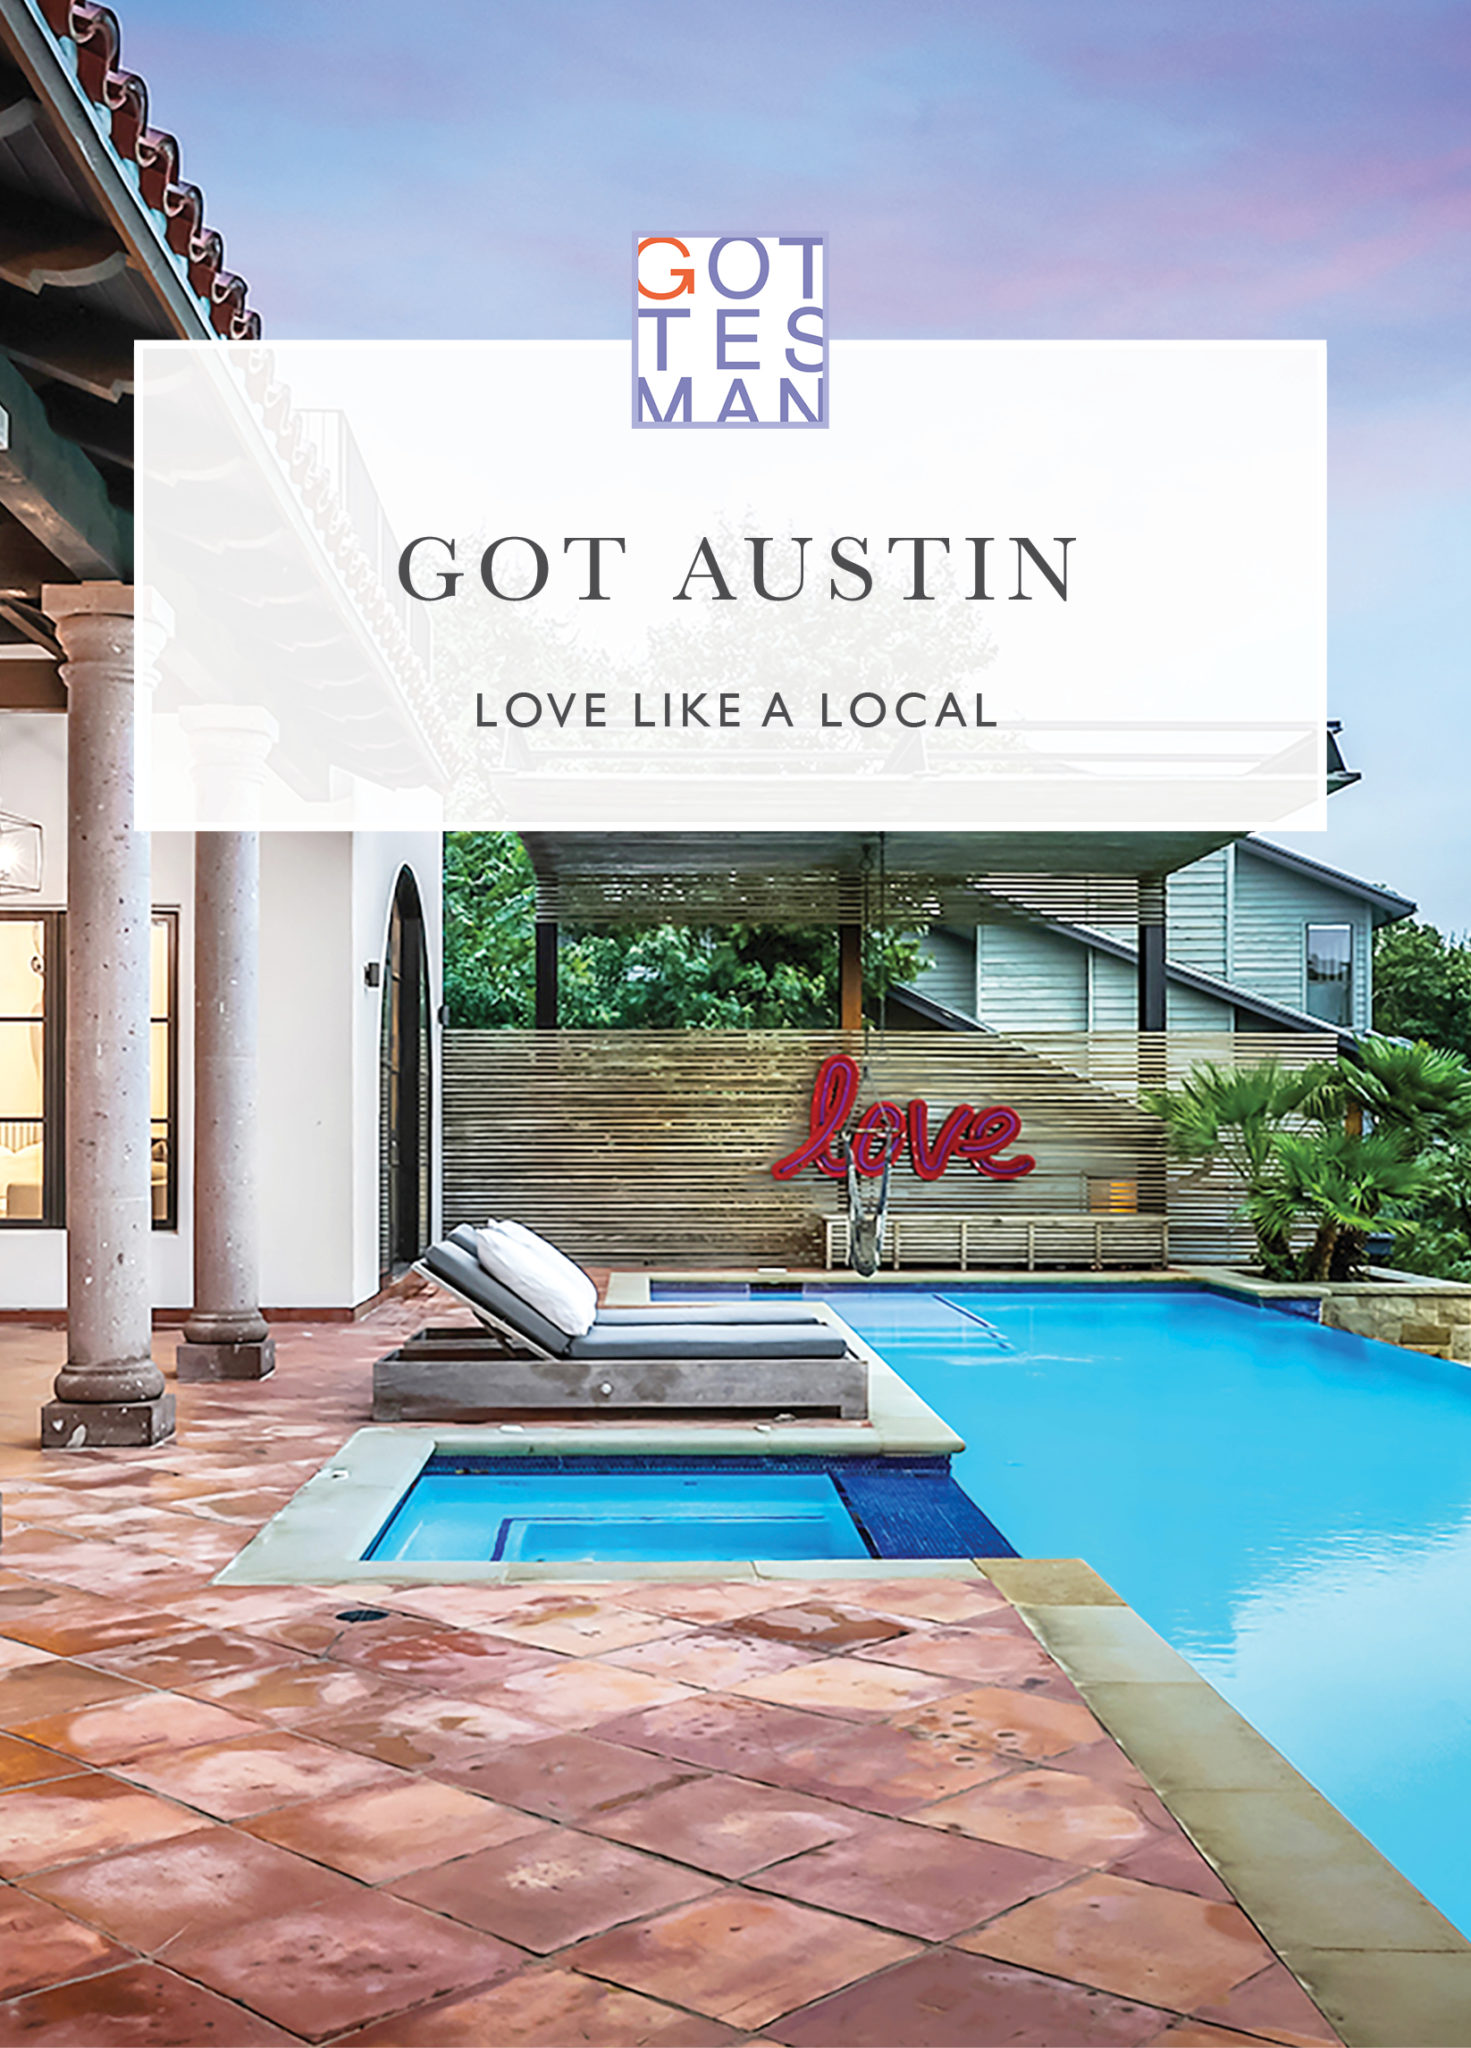 Pool with text overlay, "Got Austin: Love Like a Local"